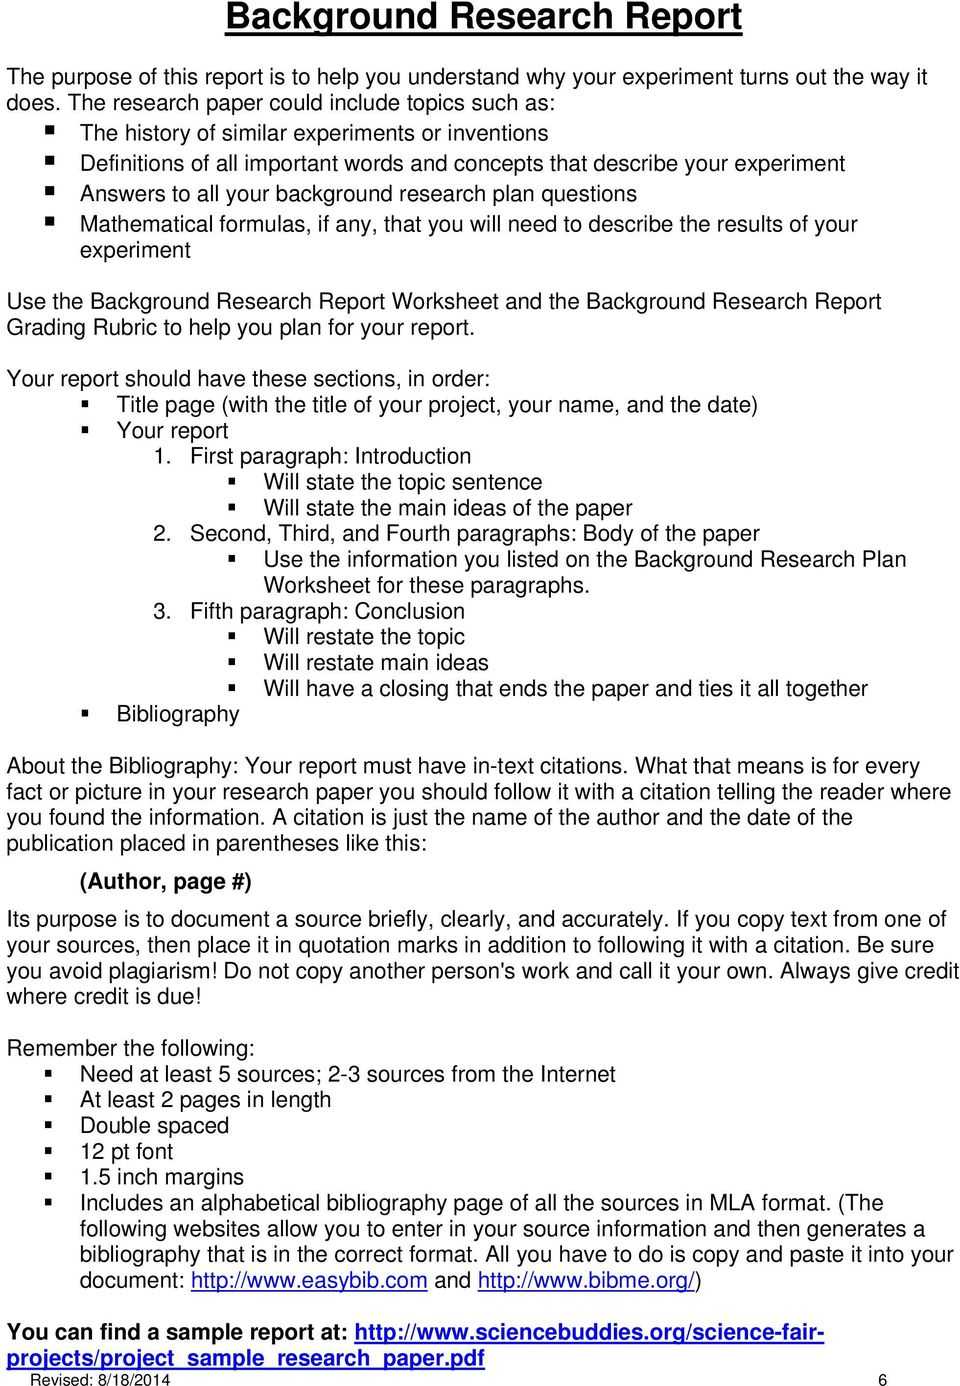 Research Paper Science Fair Project Template Introduction Throughout Research Report Sample Template